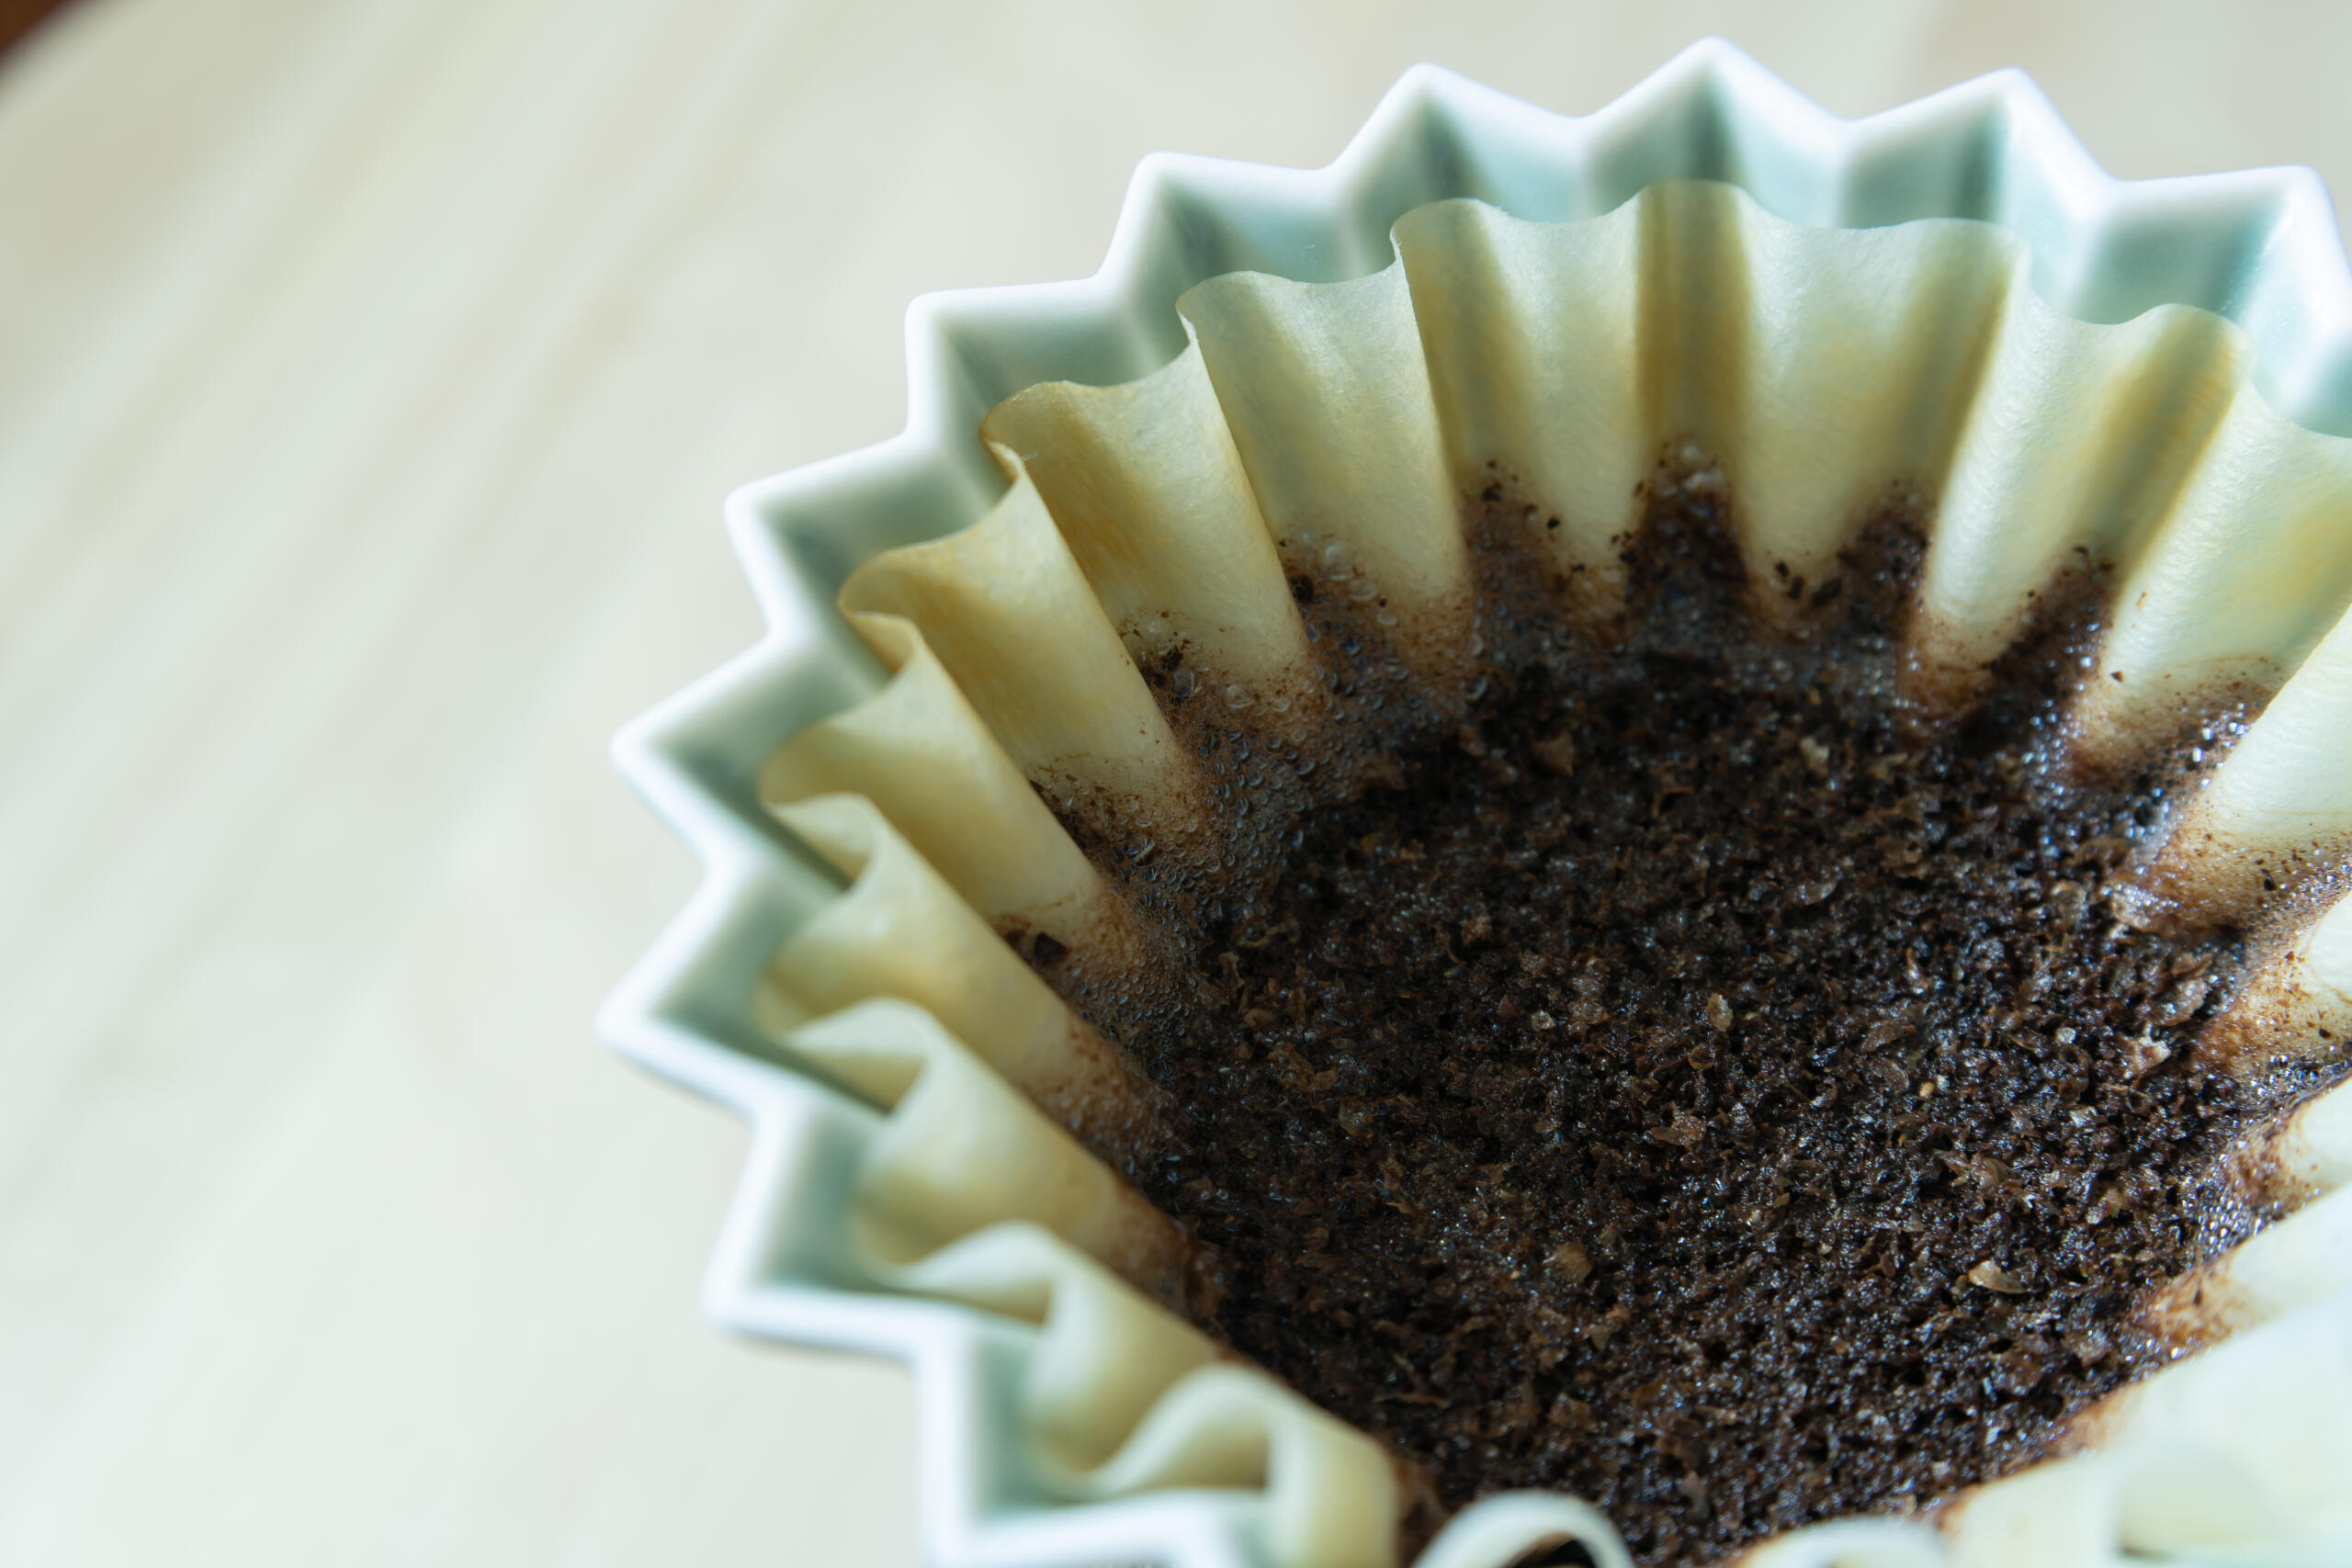 Can I Reuse a Paper Coffee Filter?